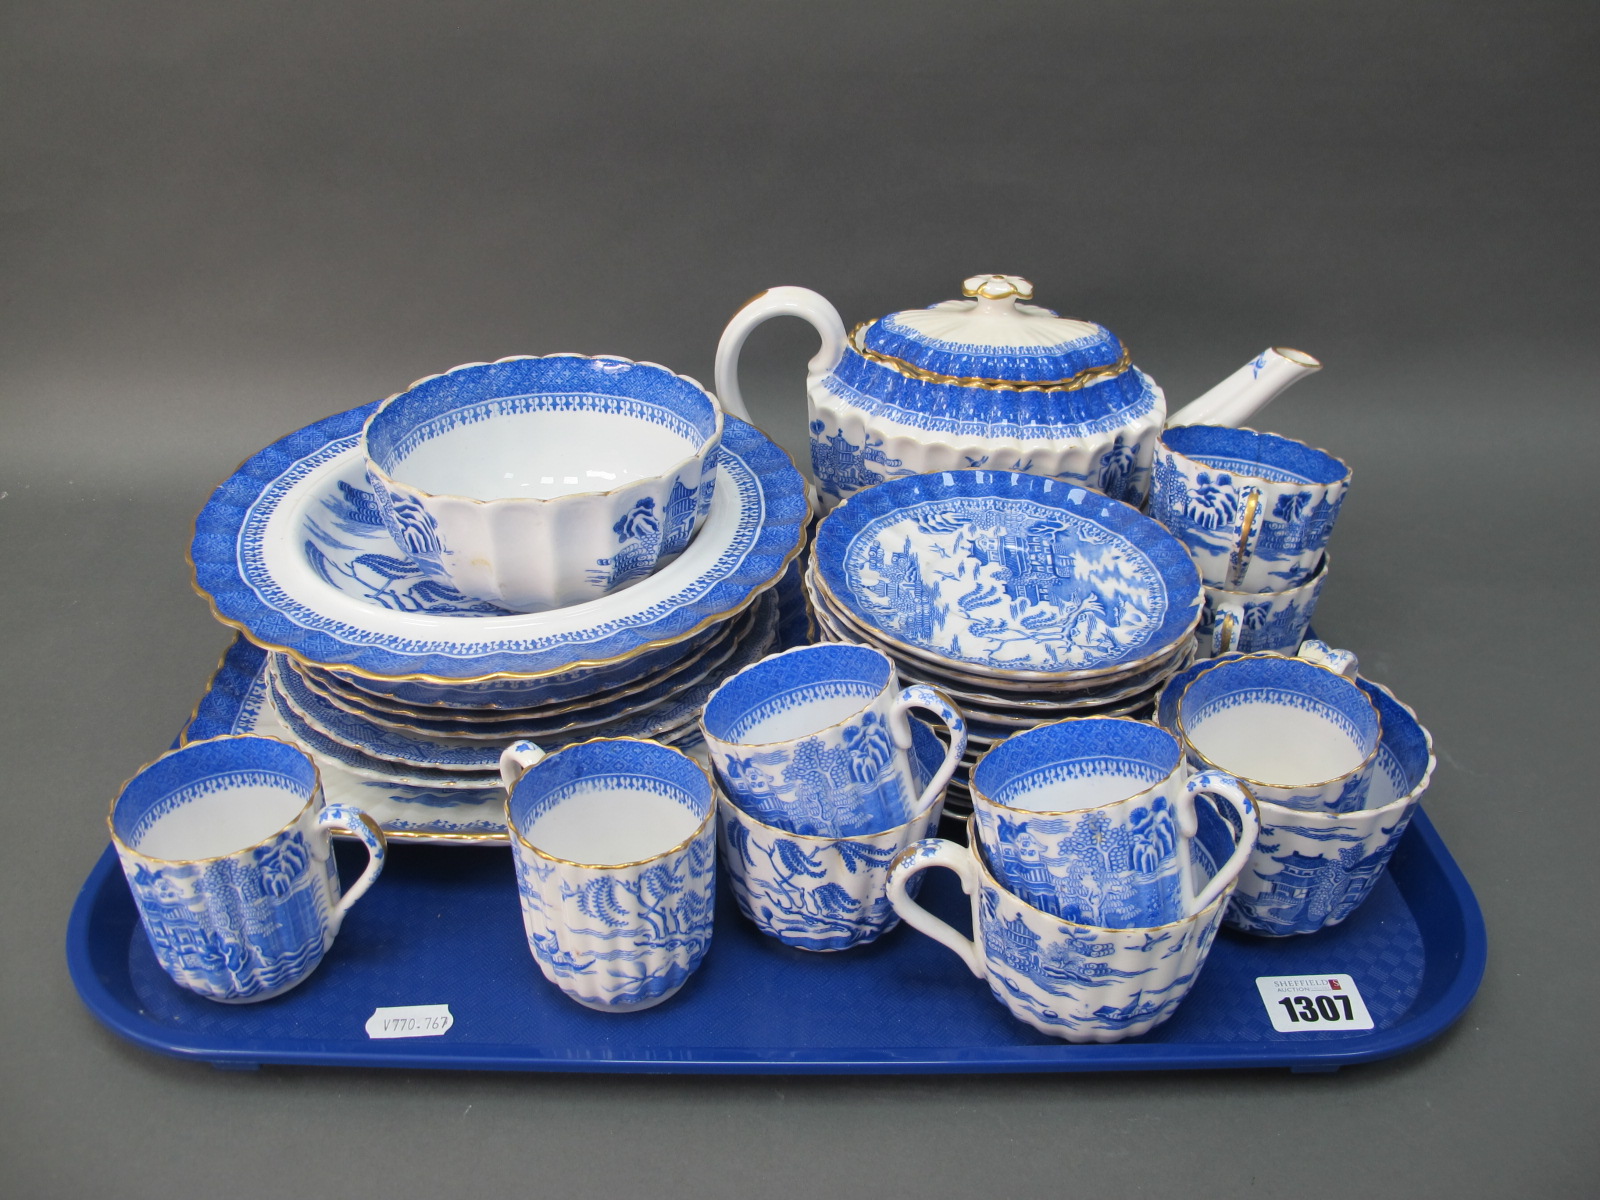 Copeland Spode Willow Pattern Table Ware. of approximately twenty nine pieces,faults noted:- One